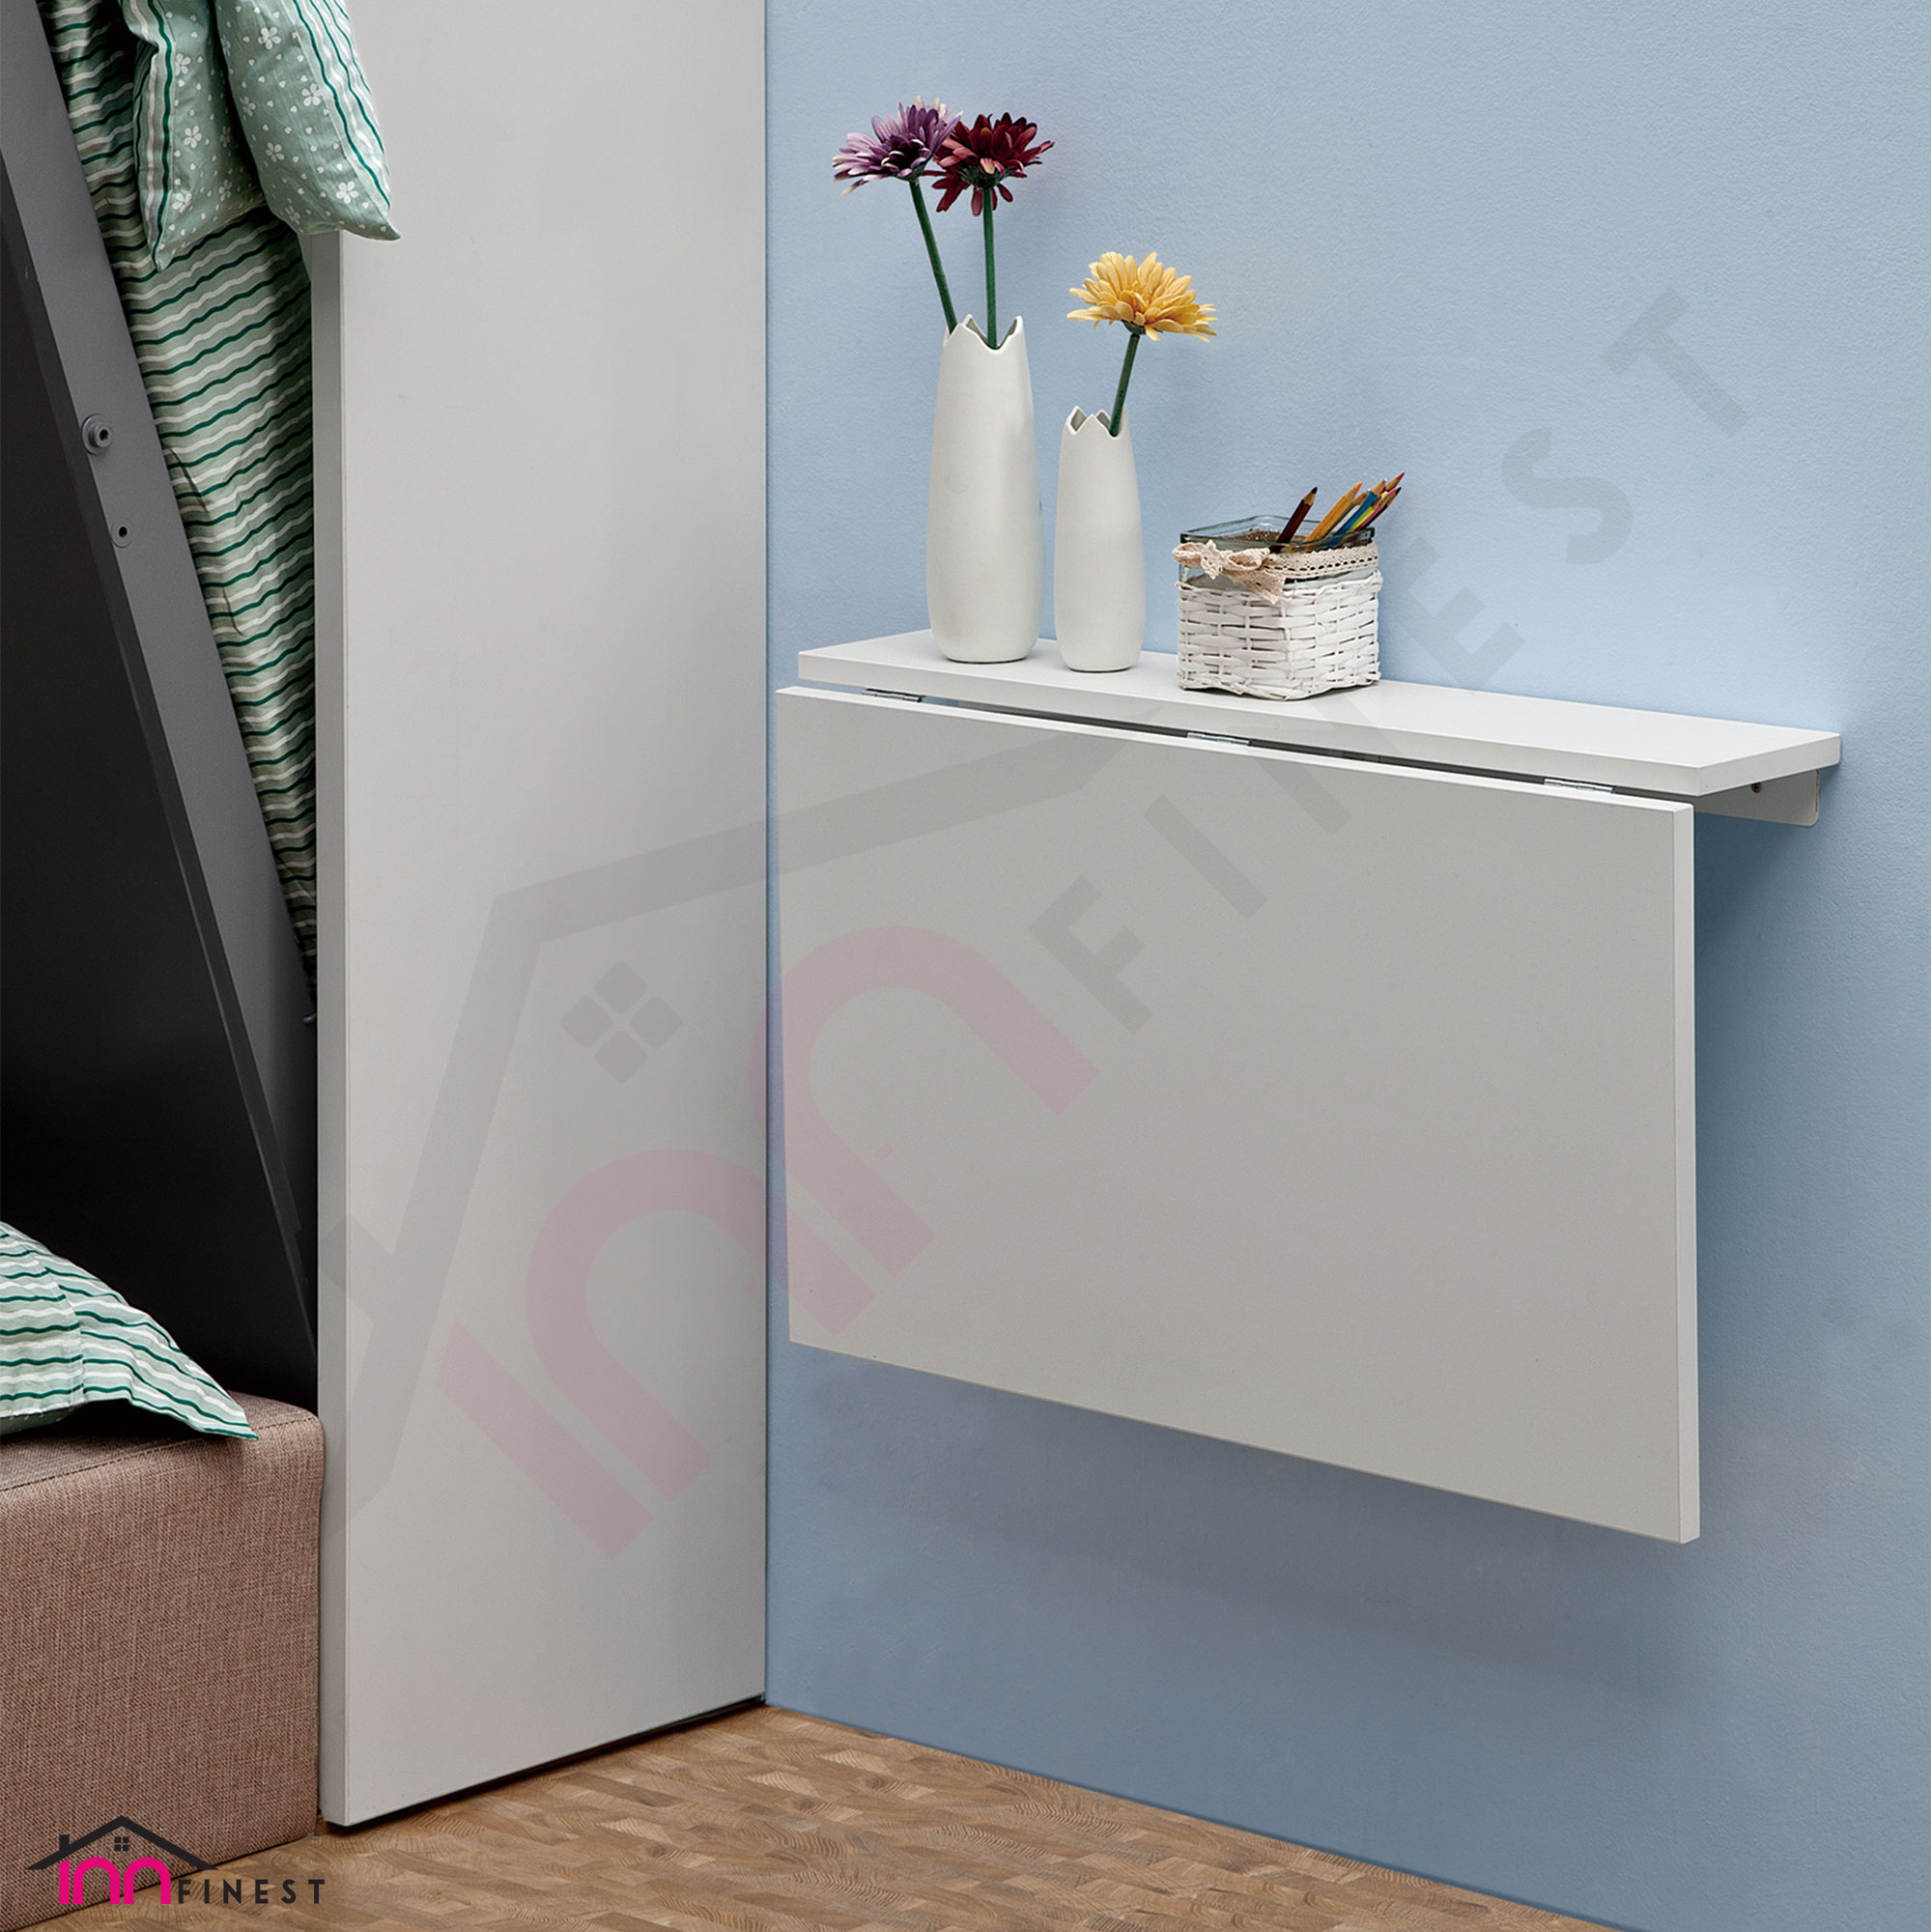 70cm foldable wall table space saving durable